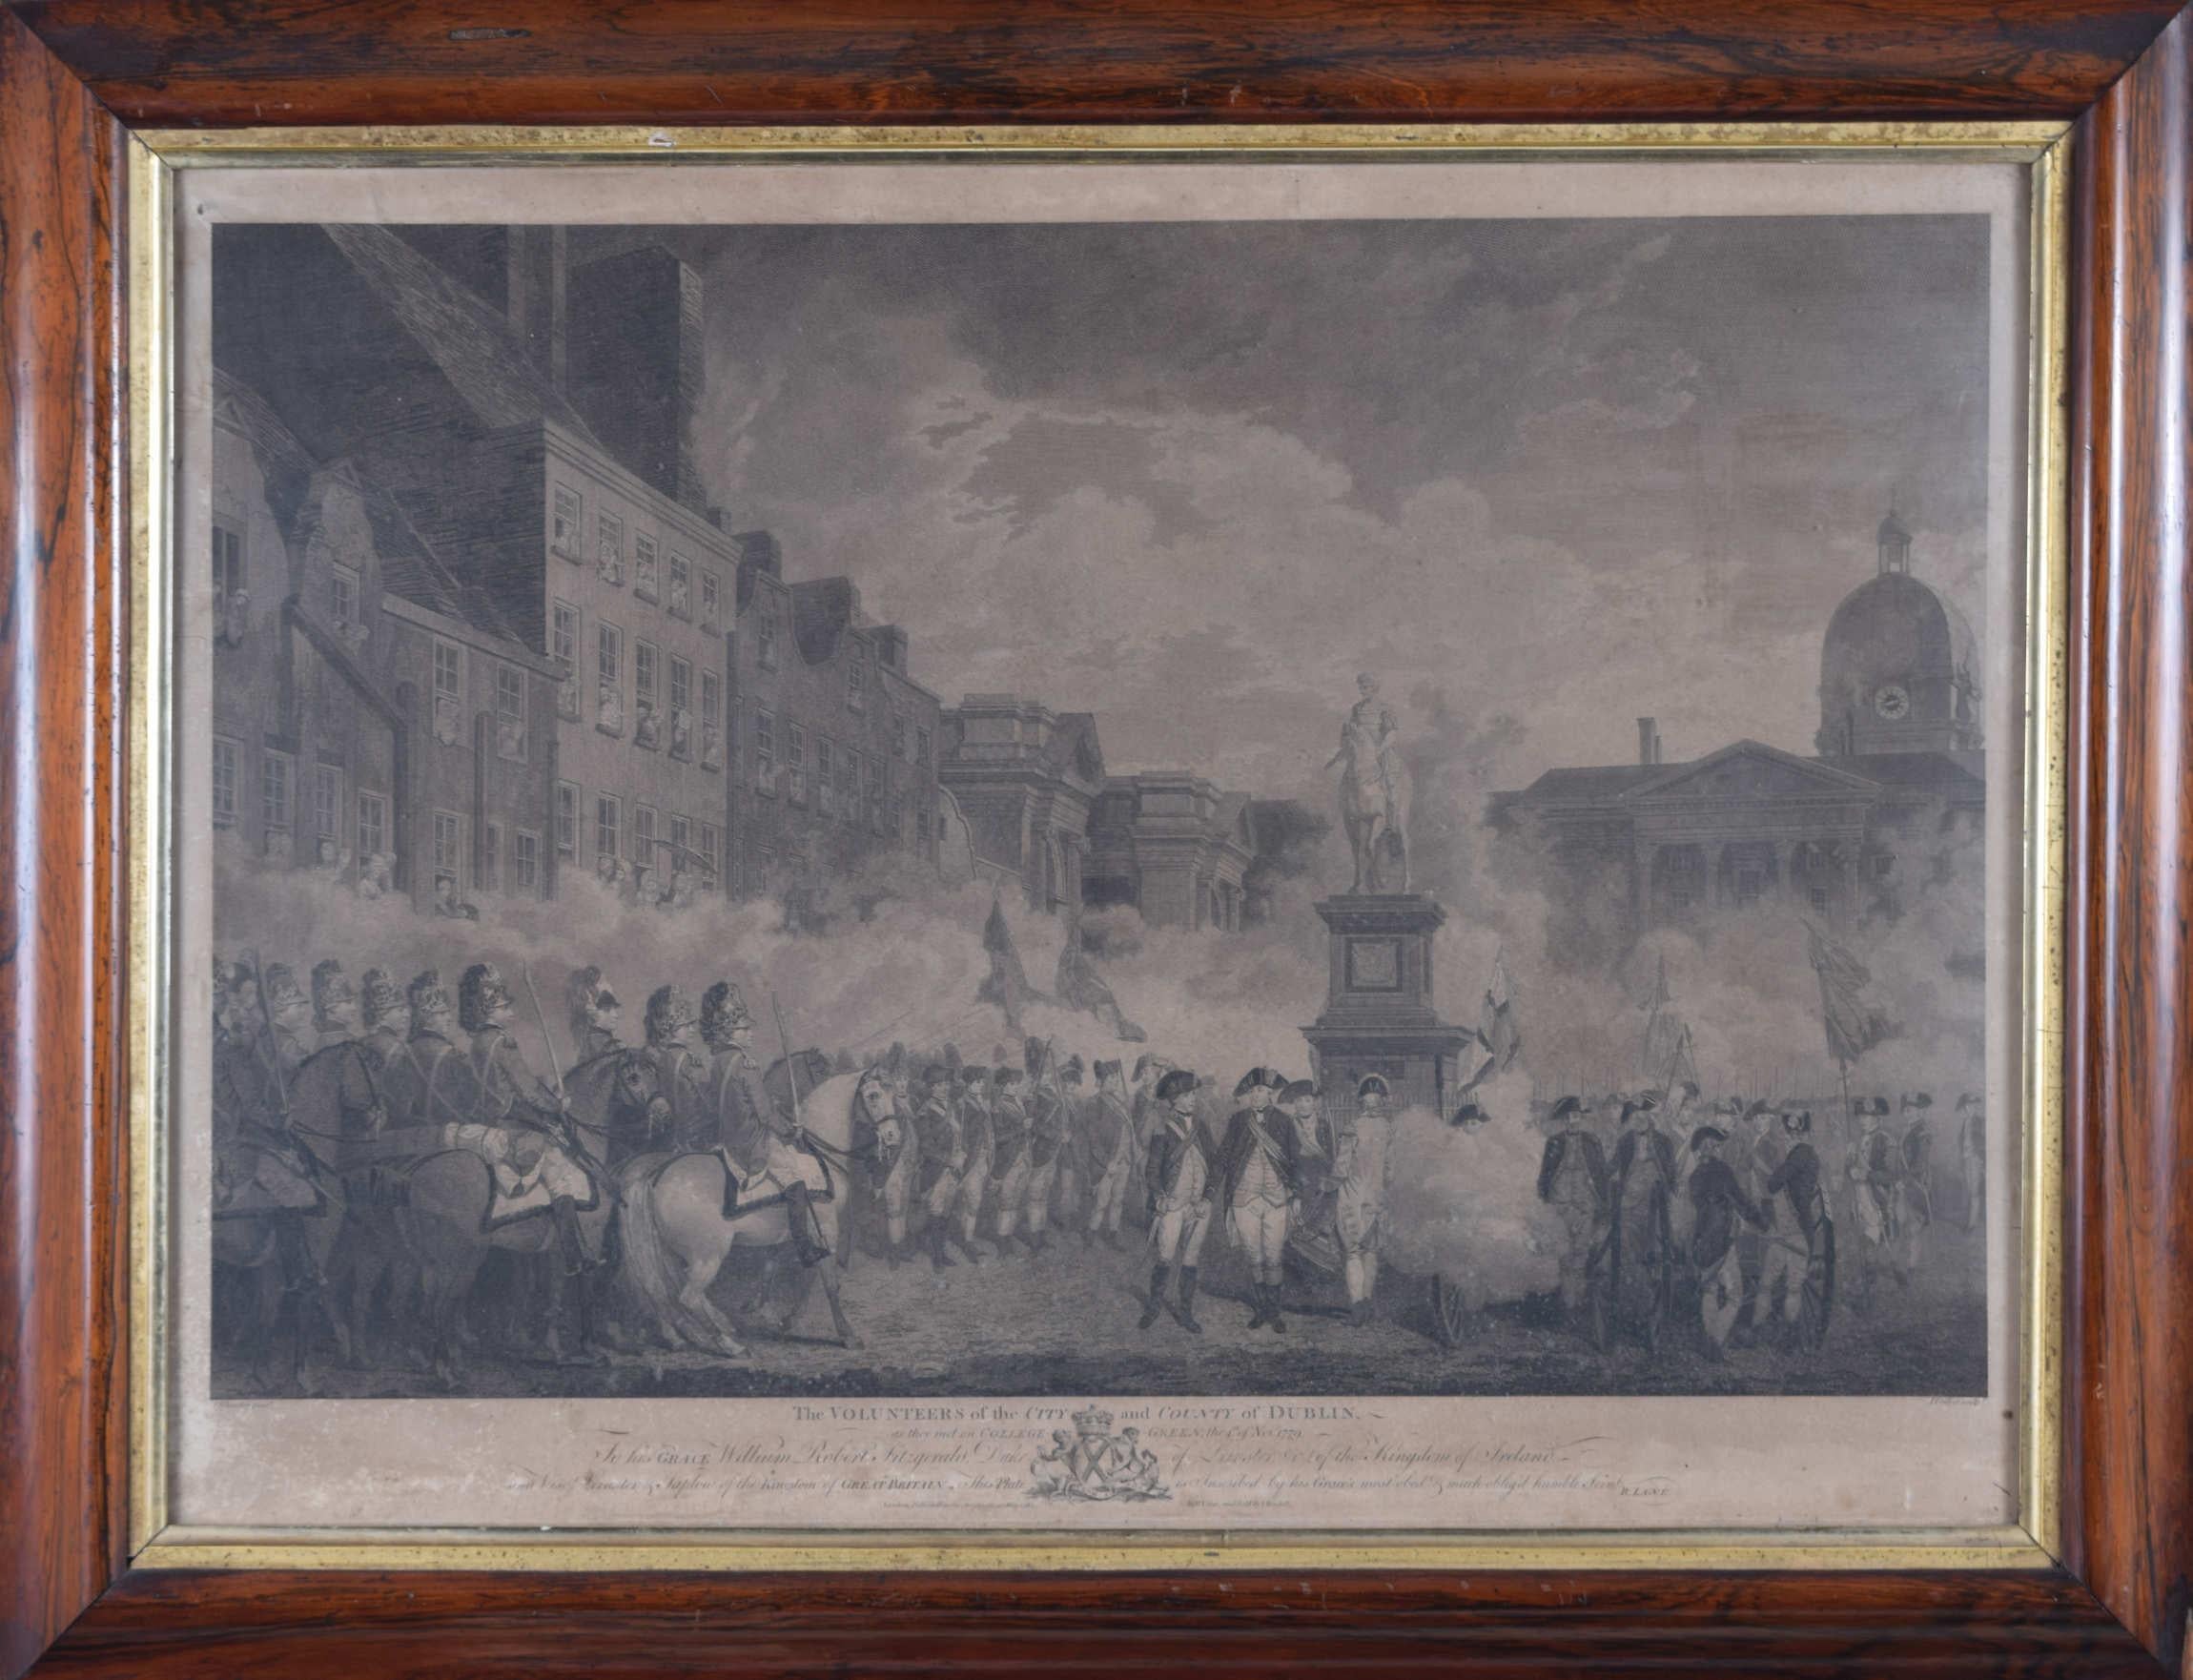 To see more, scroll down to "More from this Seller" and below it click on "See all from this Seller." 

Joseph Collyer (1748 - 1827) after Francis Wheatley (1747 - 1801)
The Volunteers of the City and County of Dublin
Monochrome print
28 x 31 cm

A